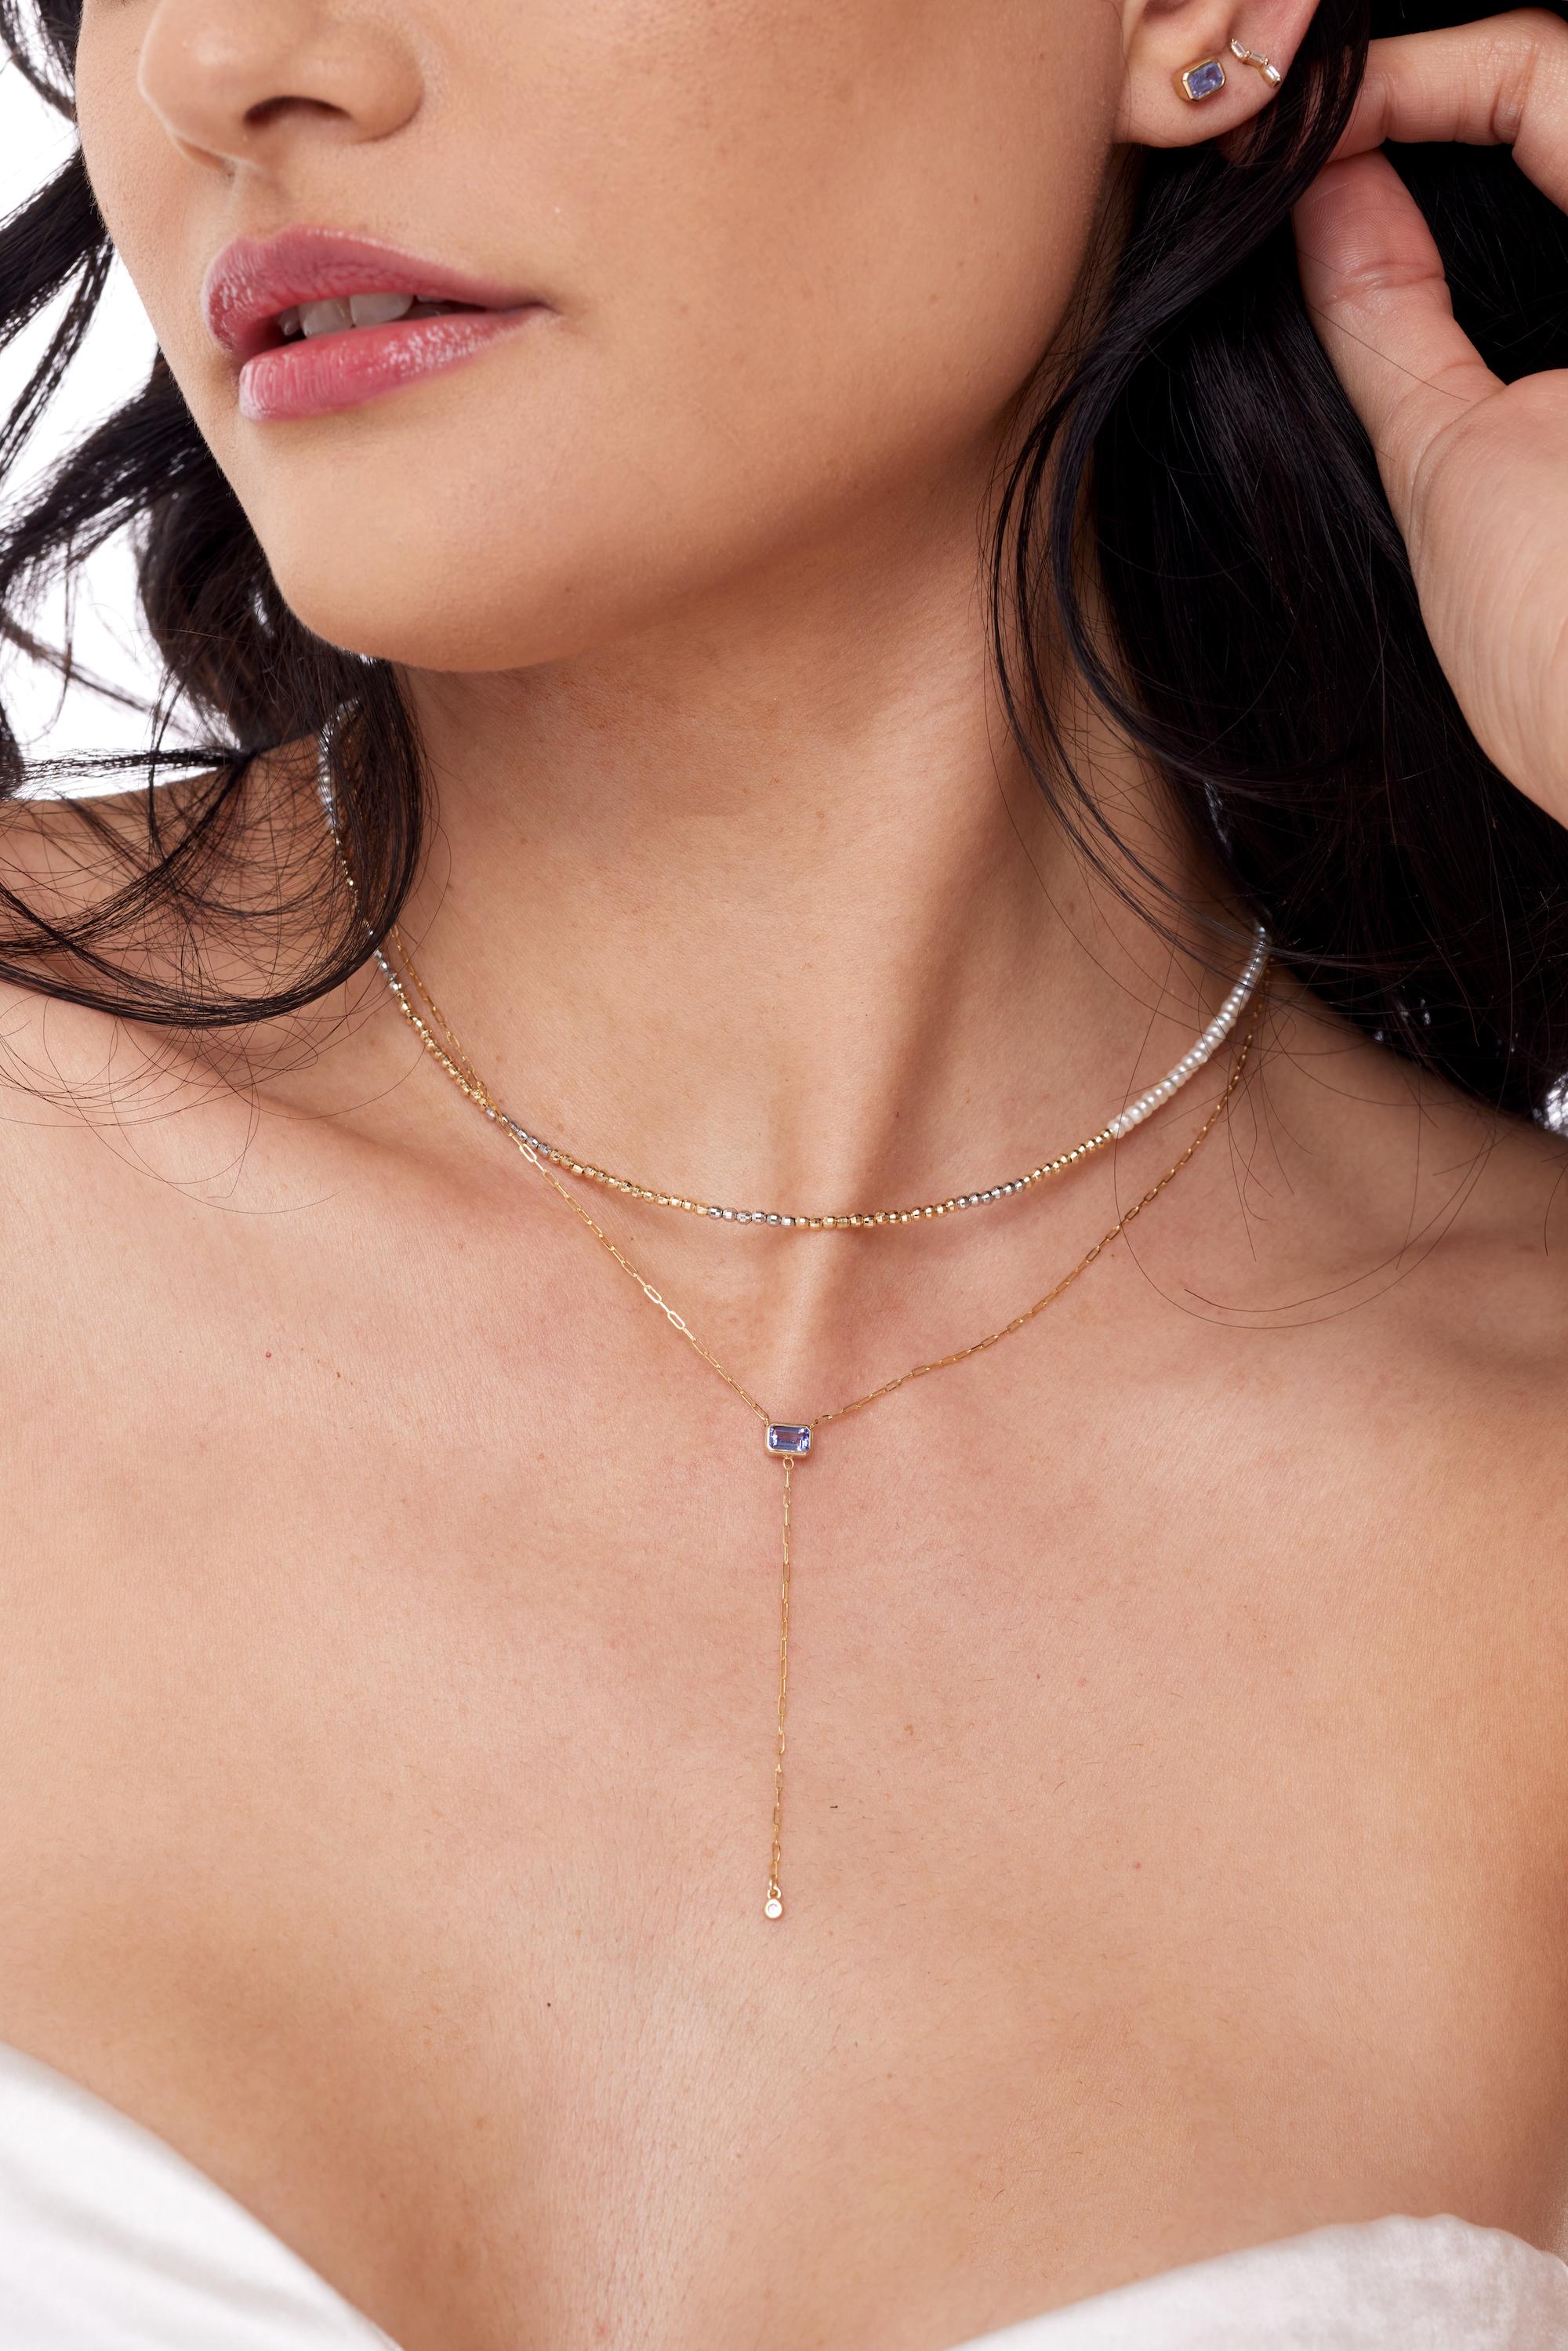 We have taken our MINI paper clip chain and added a DROP and something shiny to it! Say hello to our KNIFE EDGE Y-Neck Gemstone Necklace-This version shows off a beautiful  Emerald cut Tanzanite gemstone! with a Diamond bezel. Turn heads with the